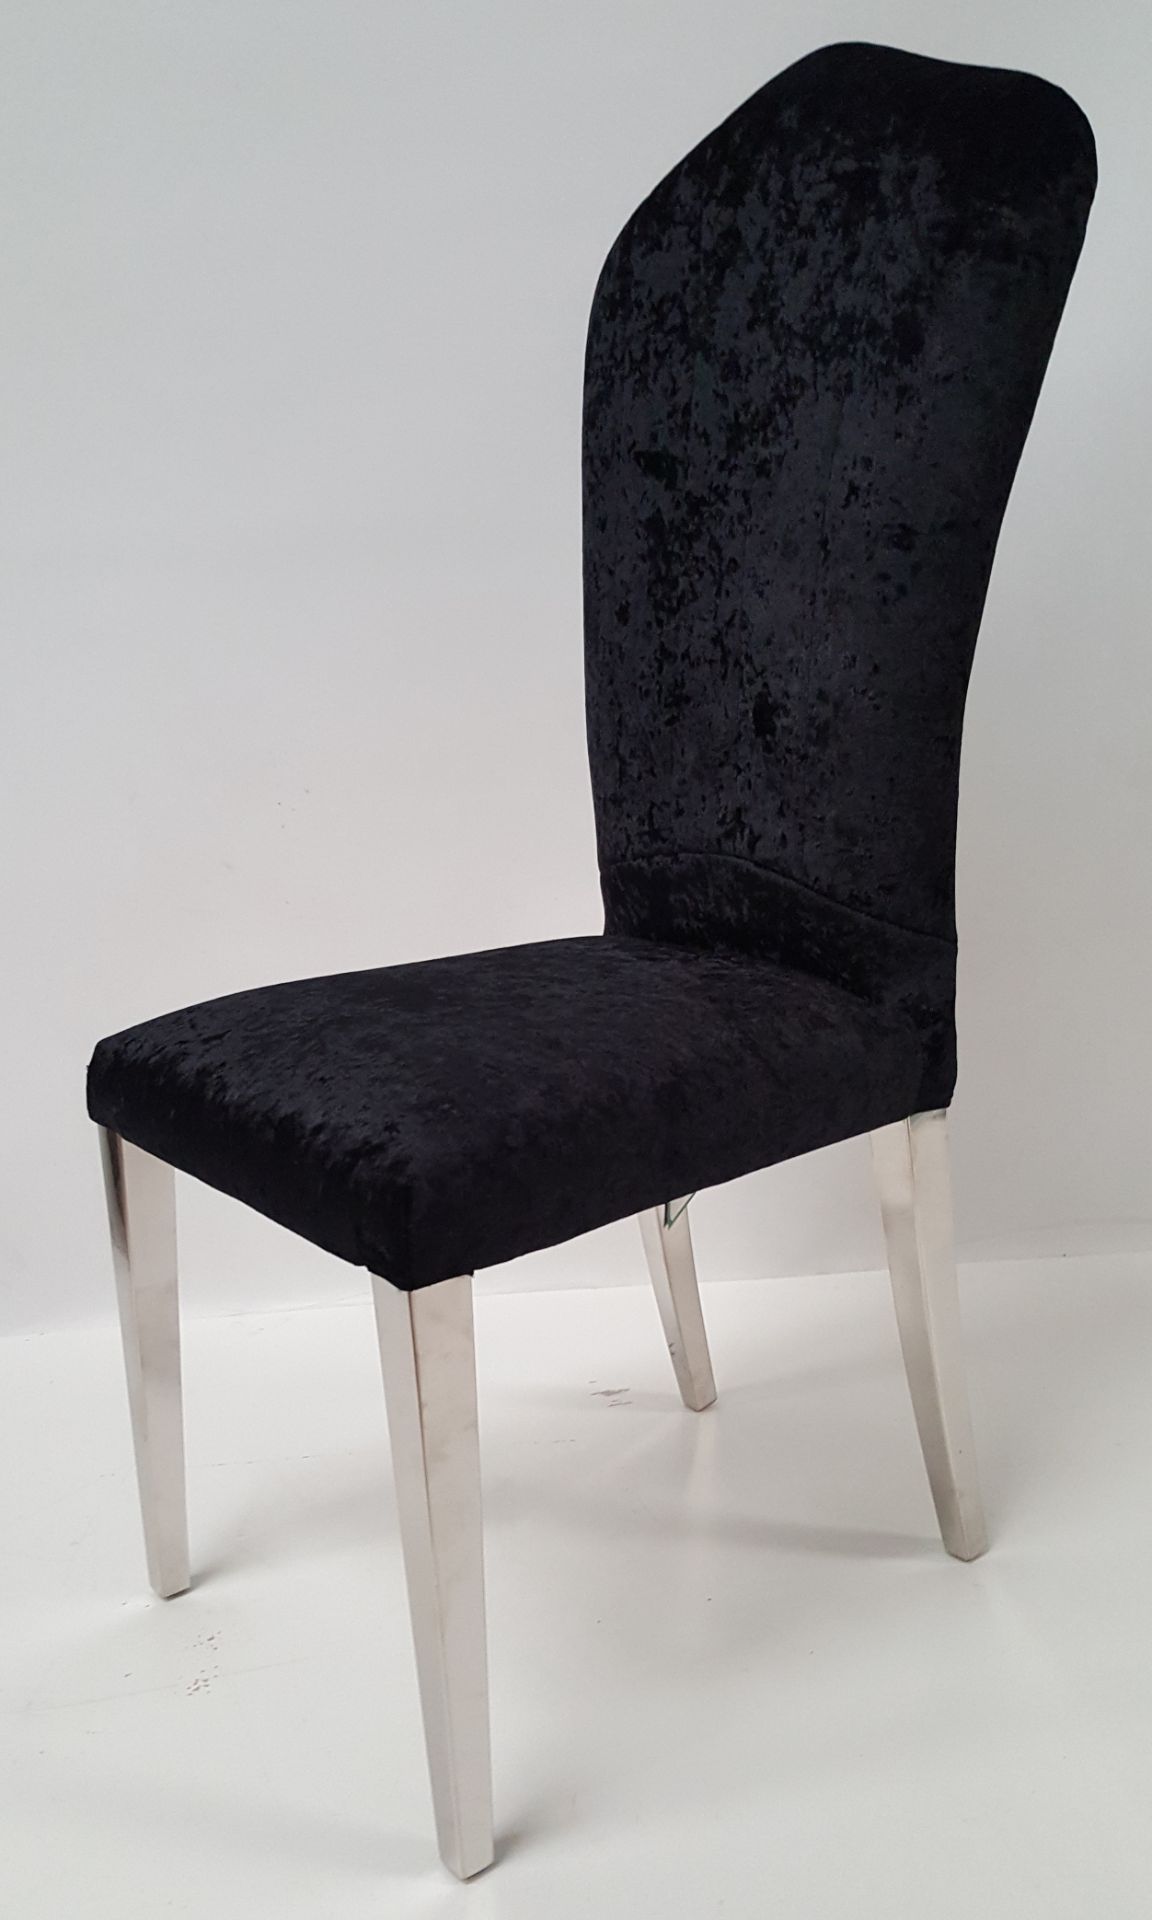 6 x STYLISH BLACK CRUSHED VELVET DINING TABLE CHAIRS - CL408 - Location: Altrincham WA14 - Image 2 of 6